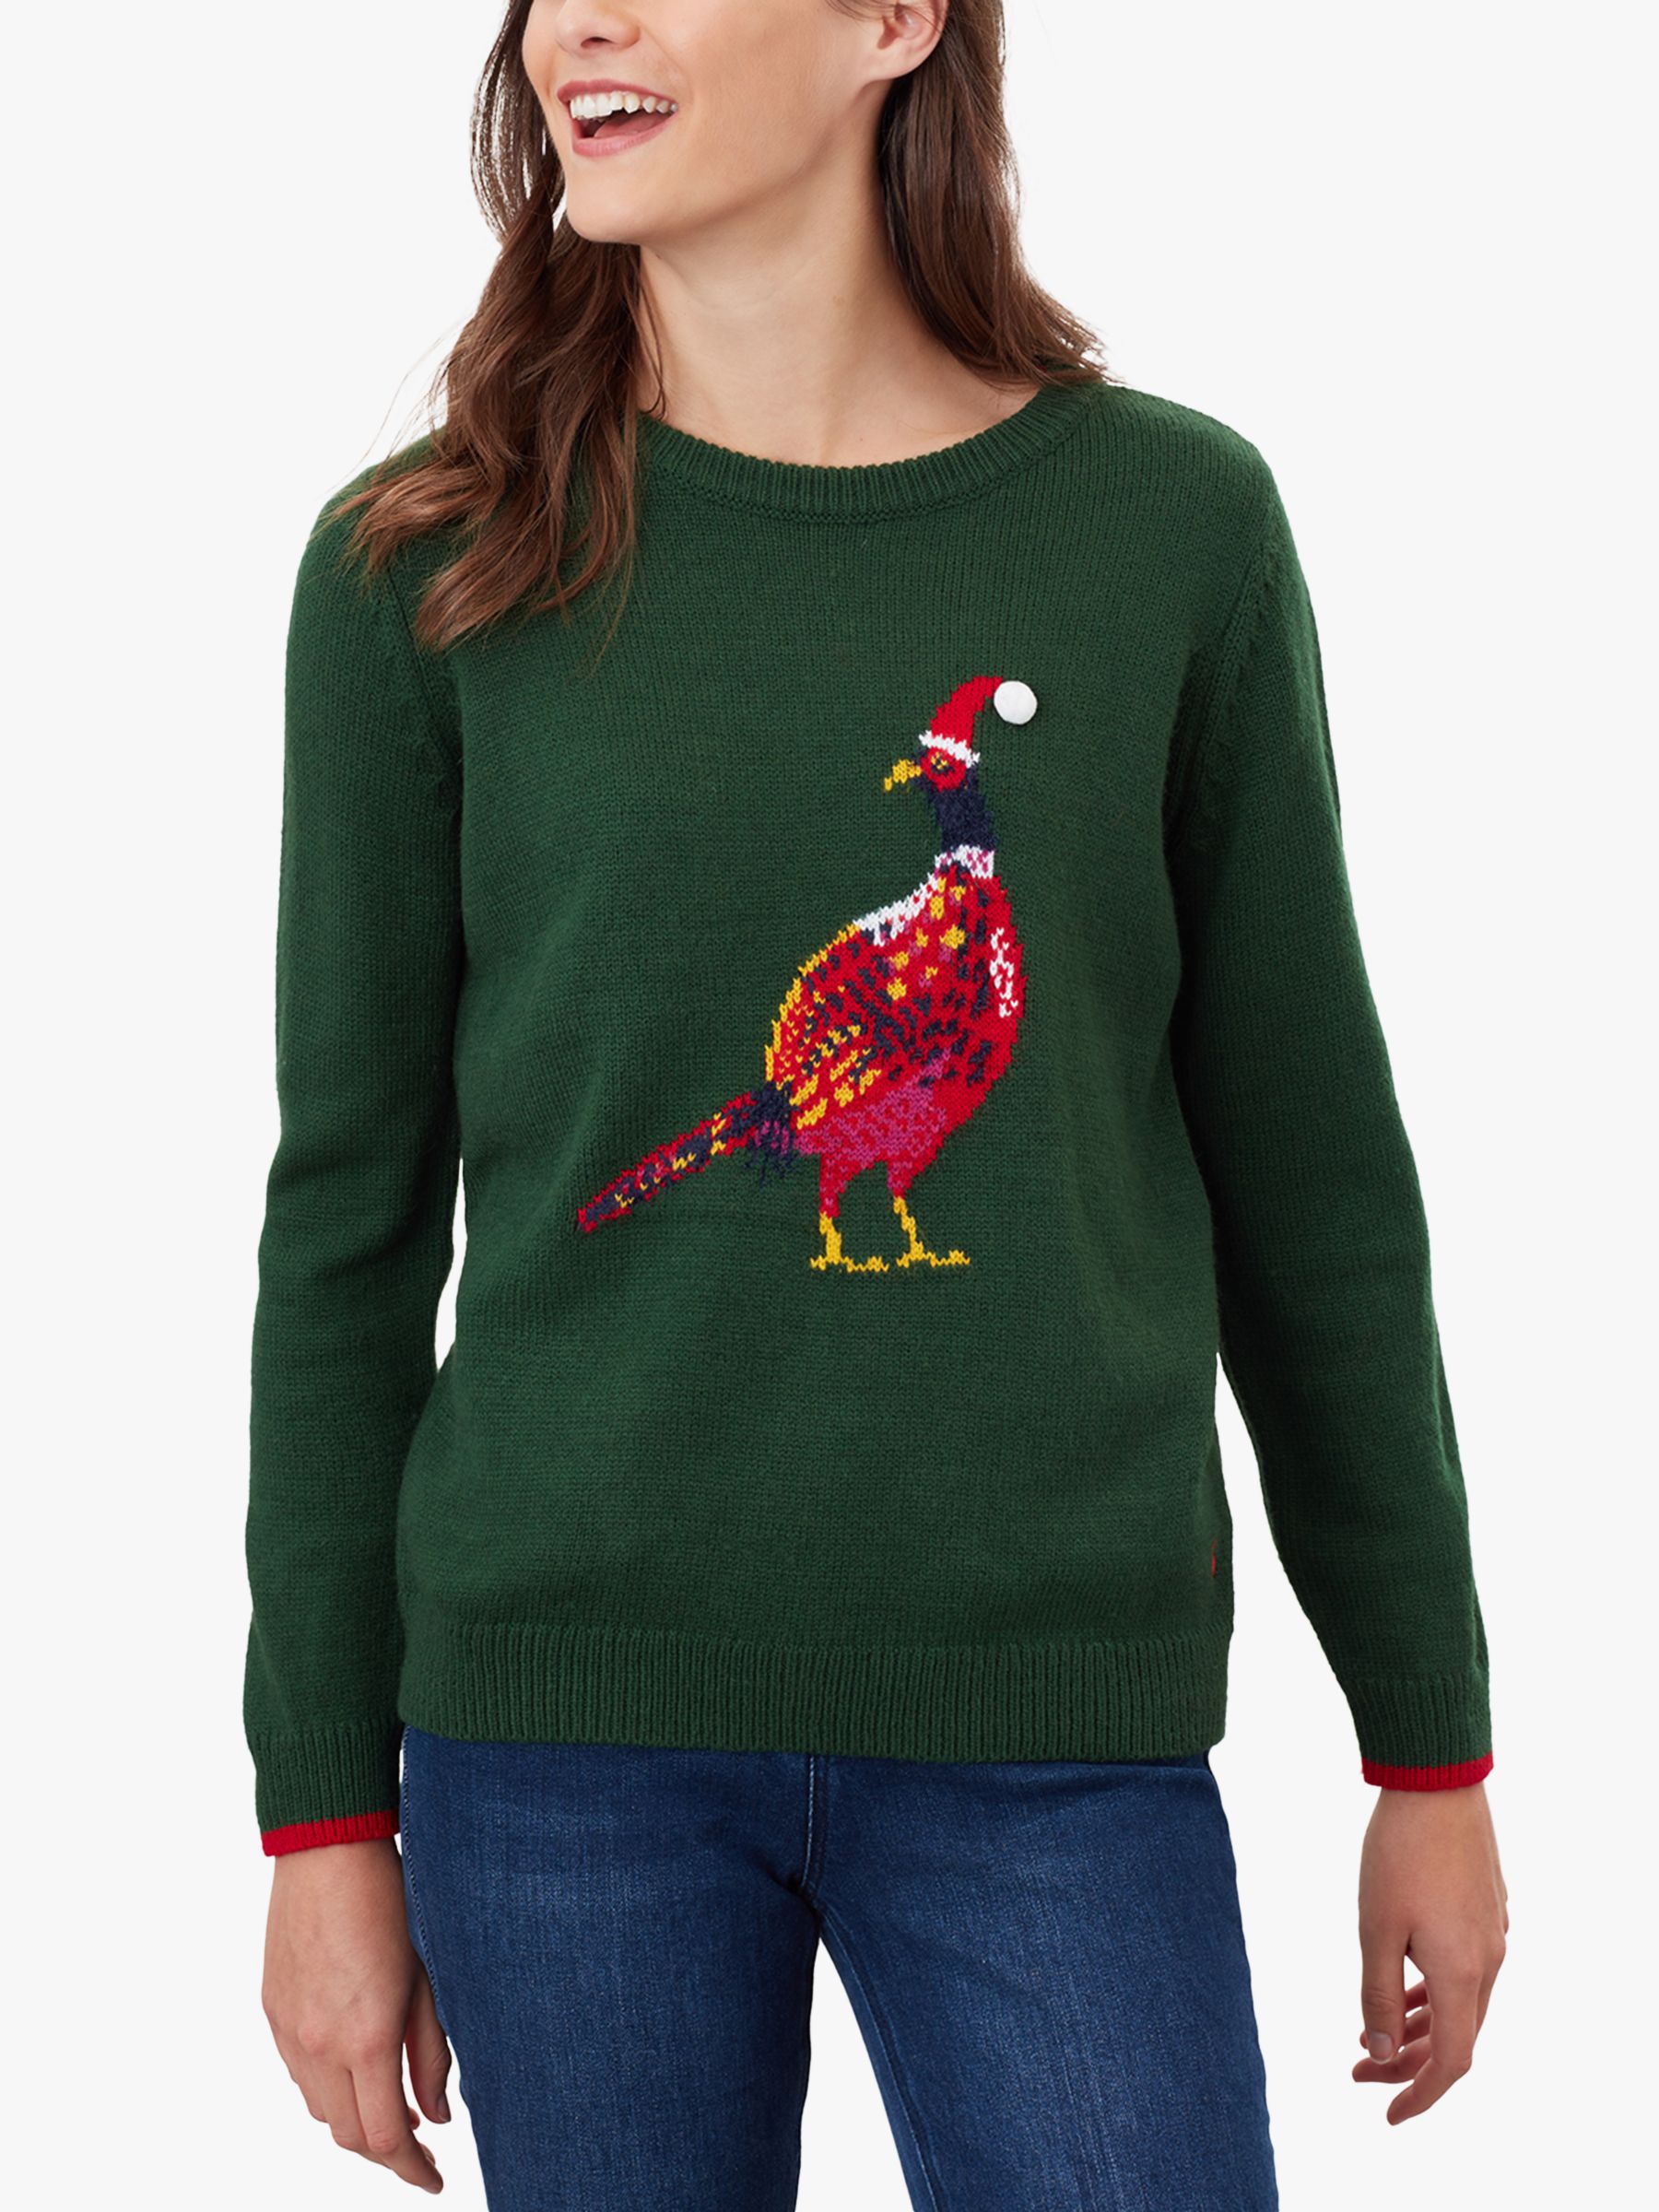 Joules The Cracking Festive Jumper